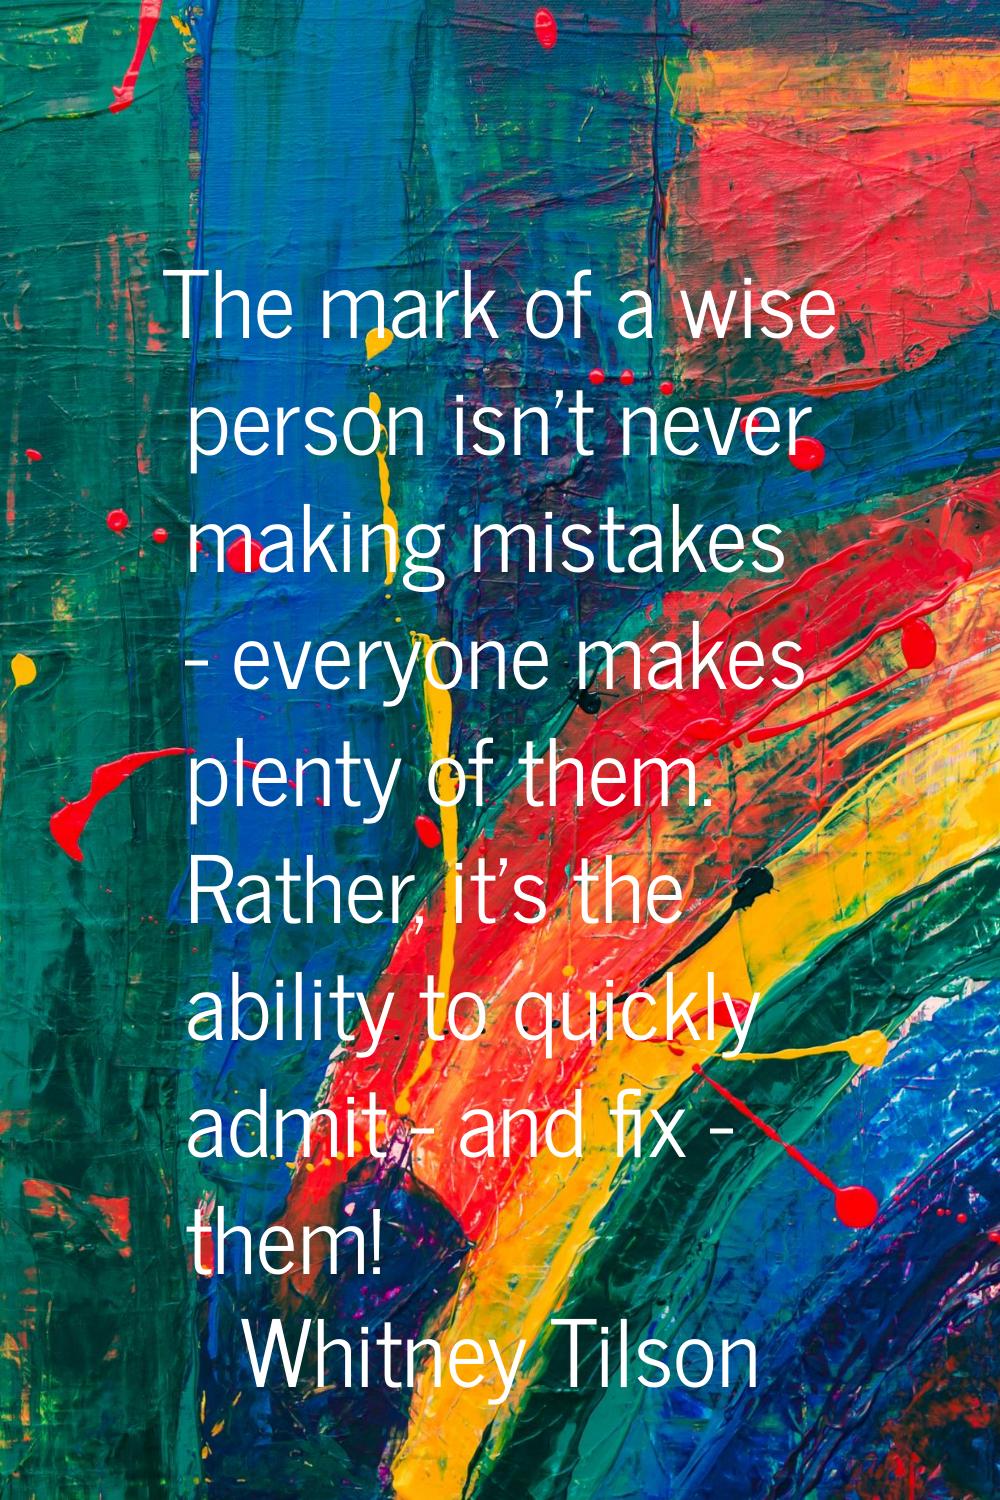 The mark of a wise person isn't never making mistakes - everyone makes plenty of them. Rather, it's